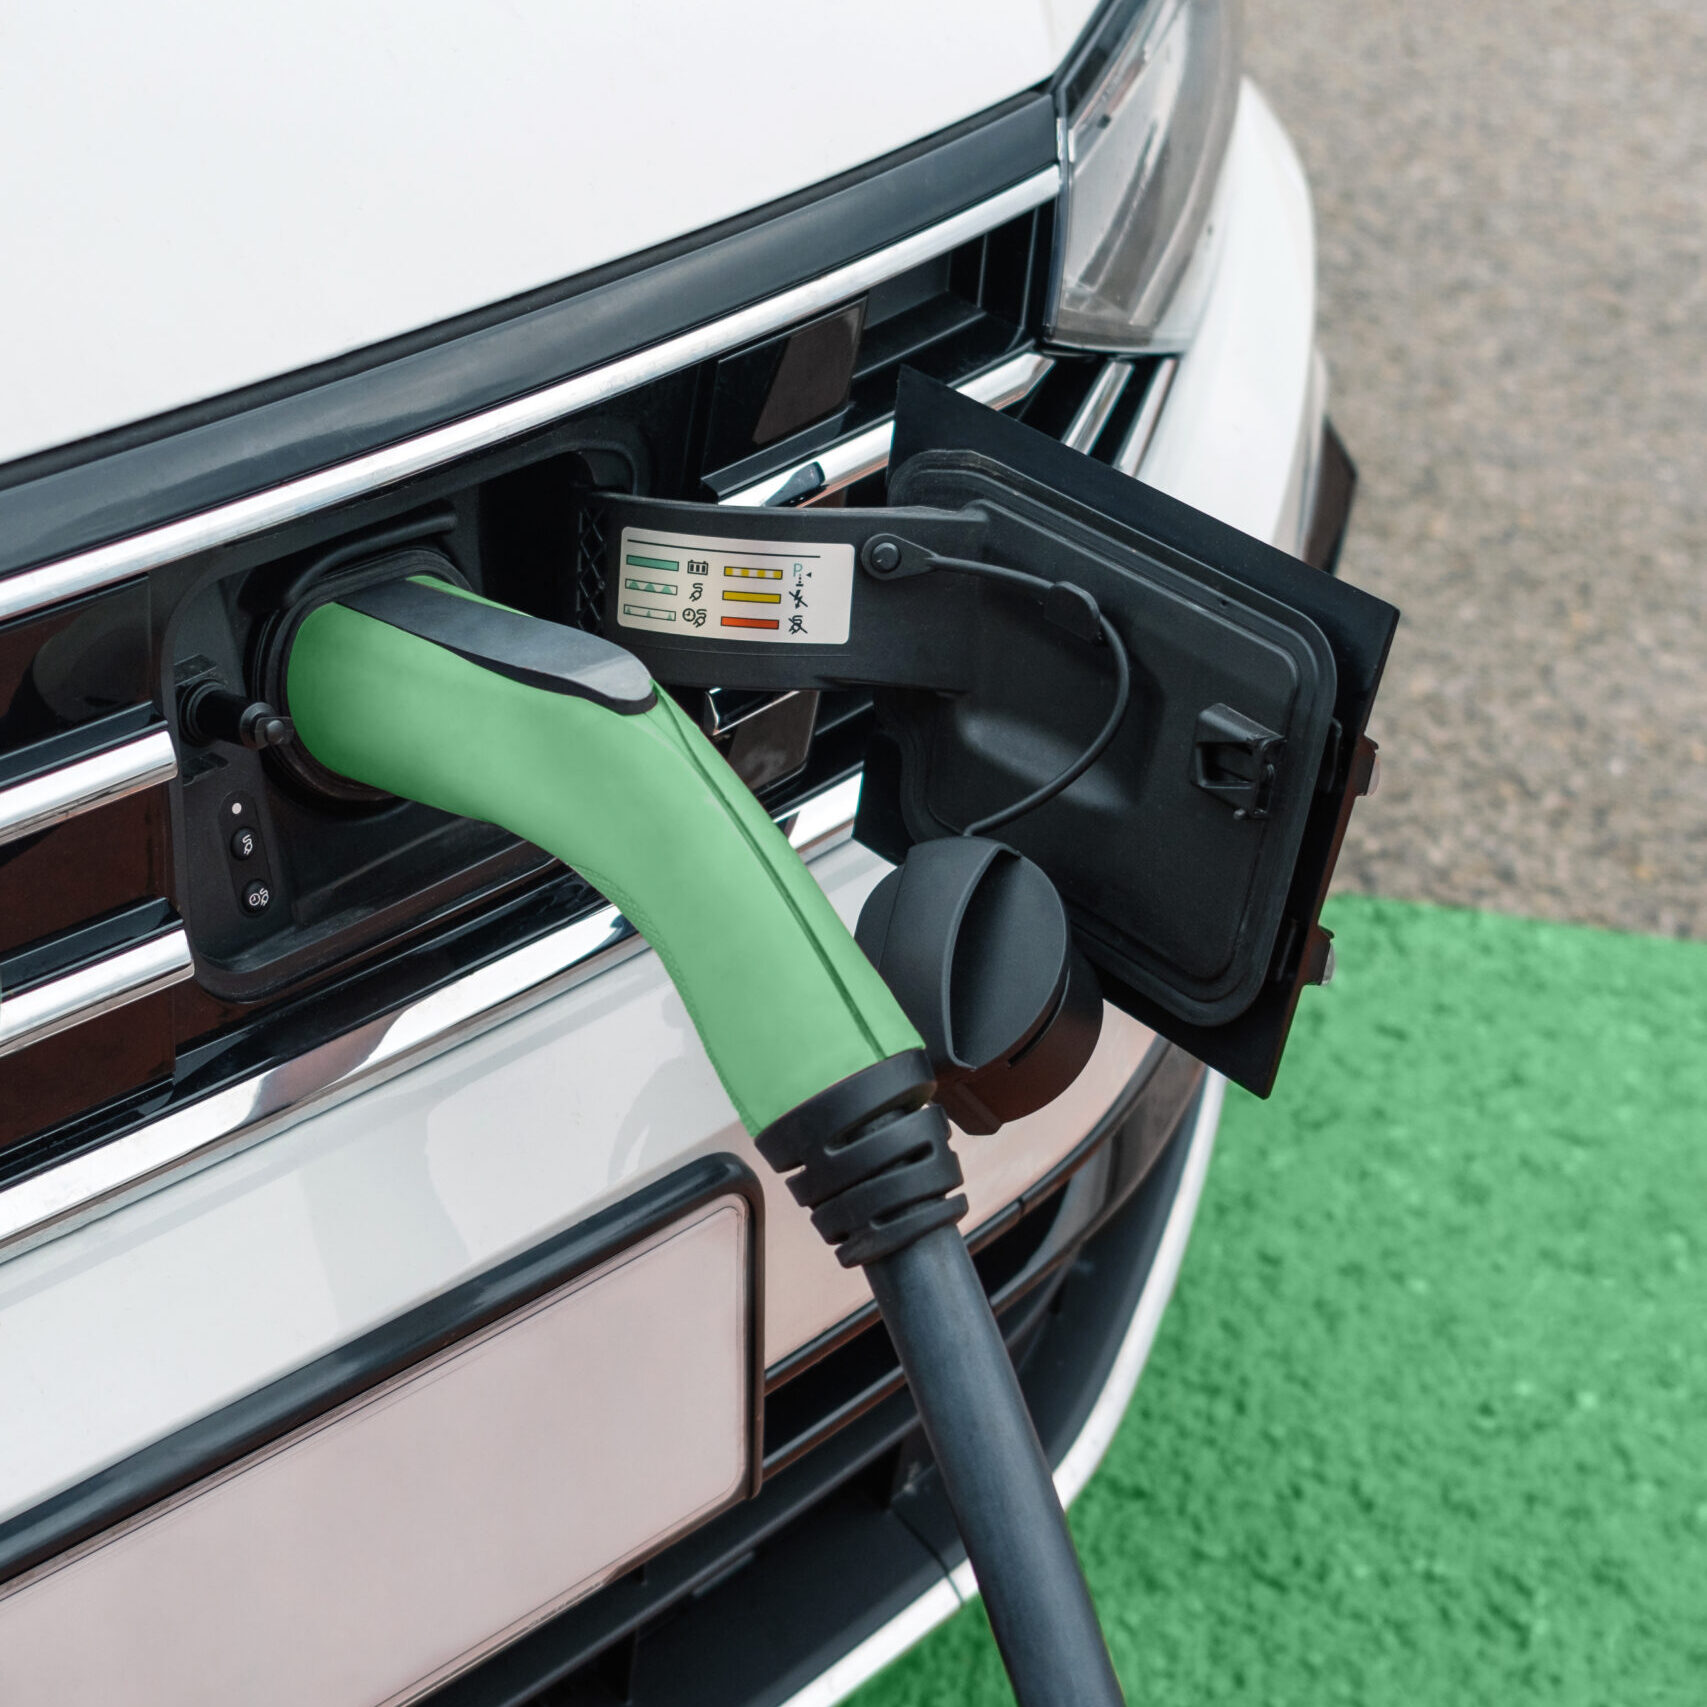 Detail of socket plugged into electric car outdoors